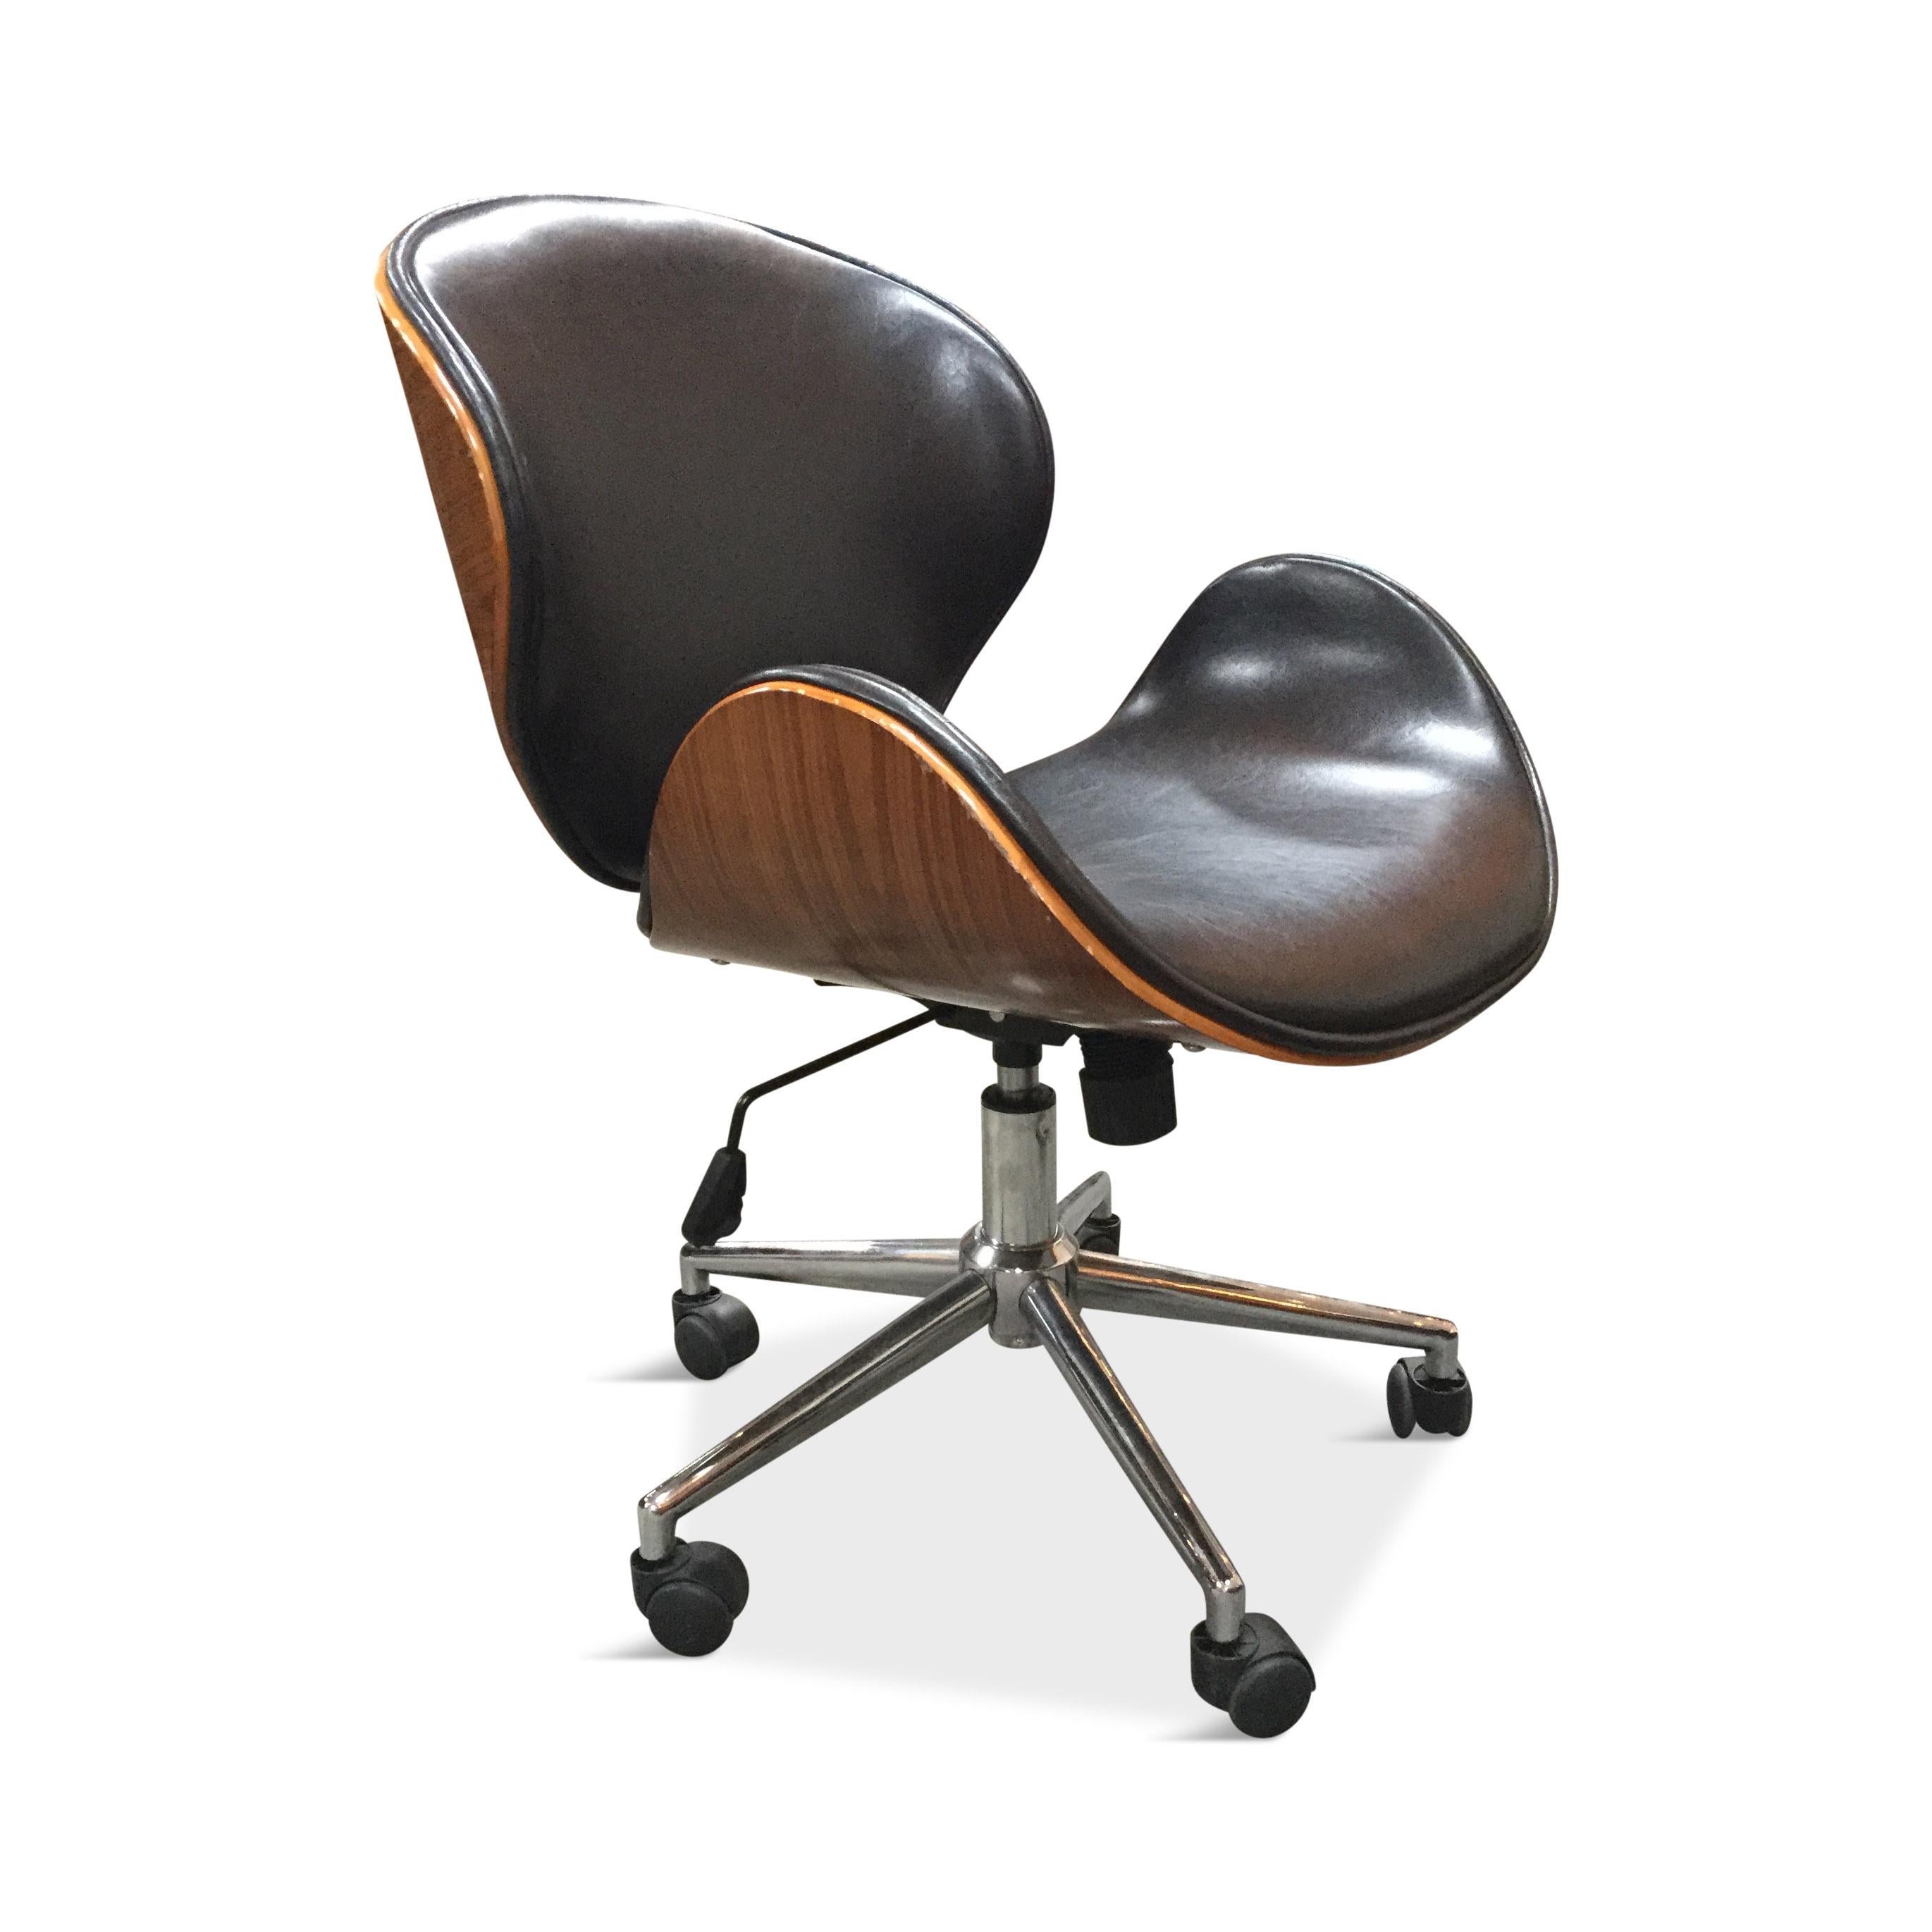 Modern office/task chair inspired by Arne Jacobsen's swan chair. Good vintage condition. Adjustable seat height. Black leather with molded plywood frame.